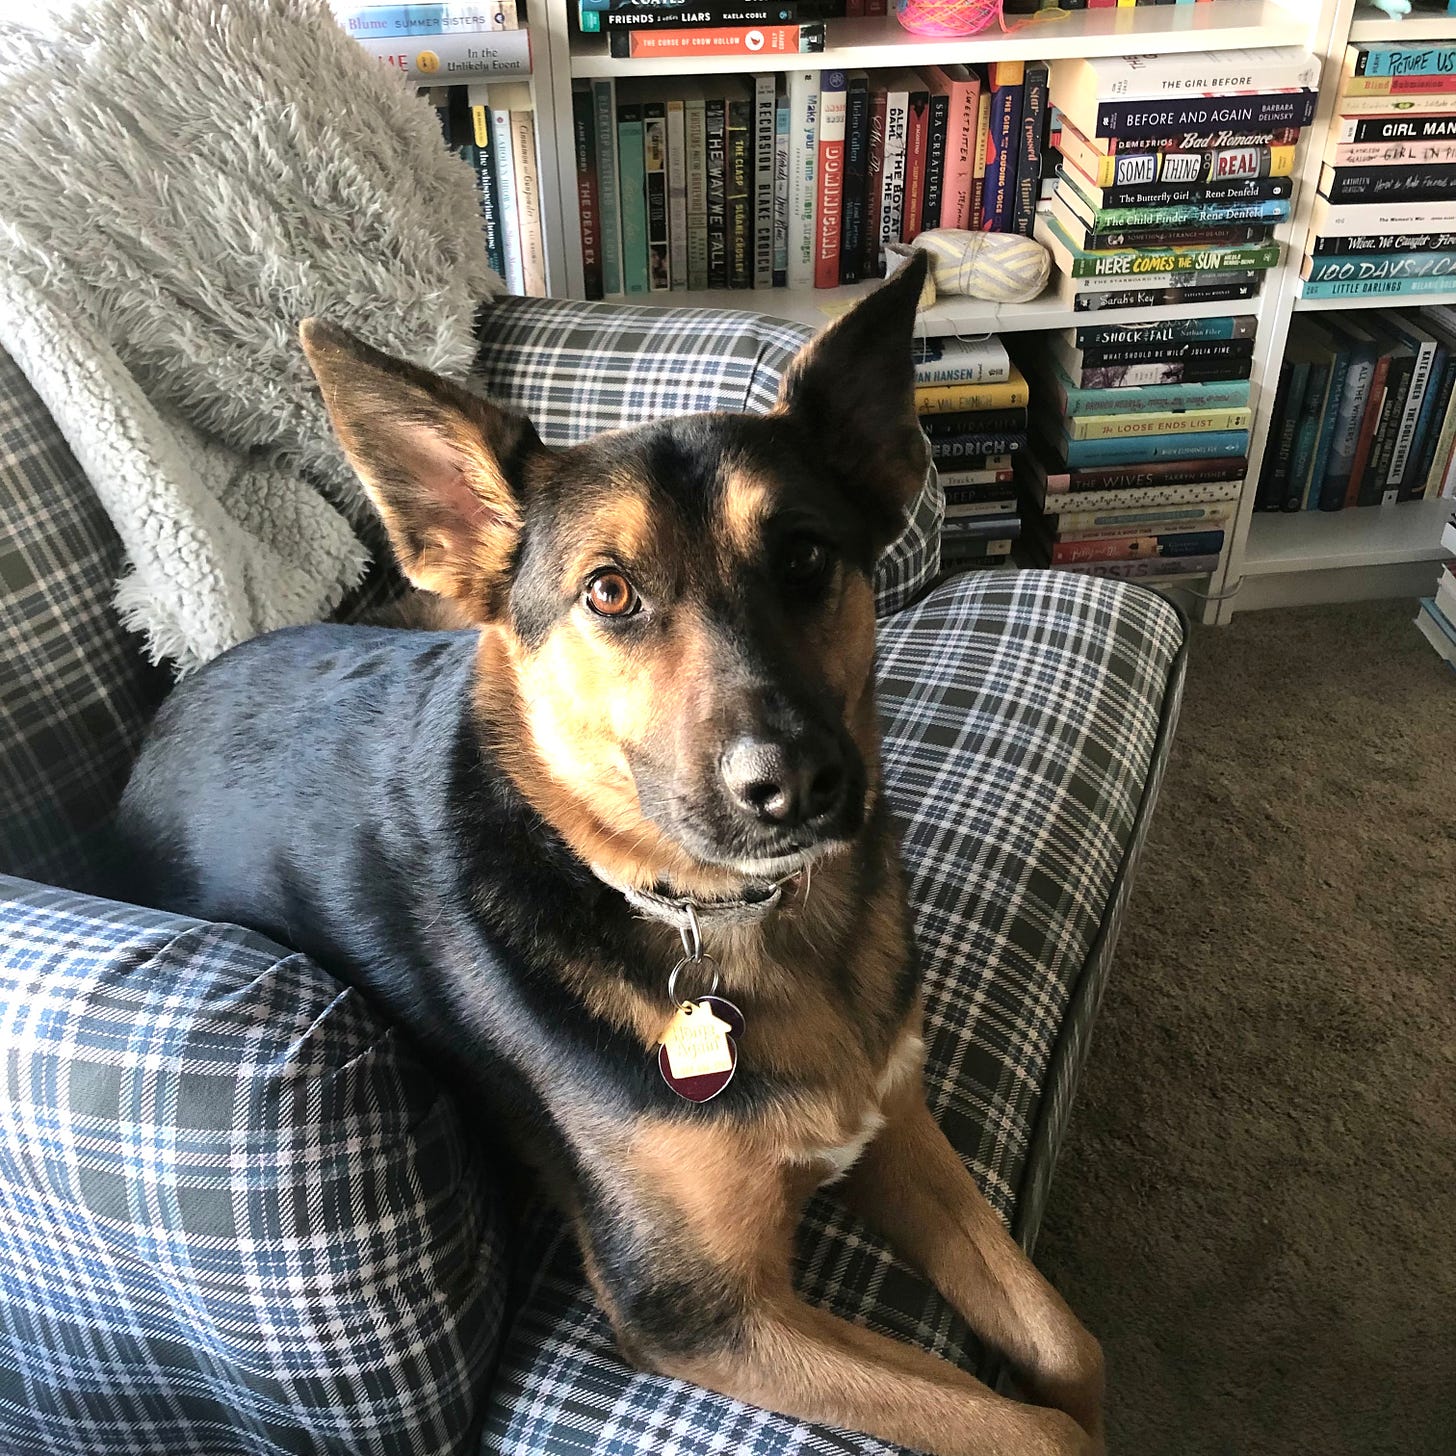 A German Shepherd with big ears sitting in a plaid chair with lots of bookshelves in the background. 